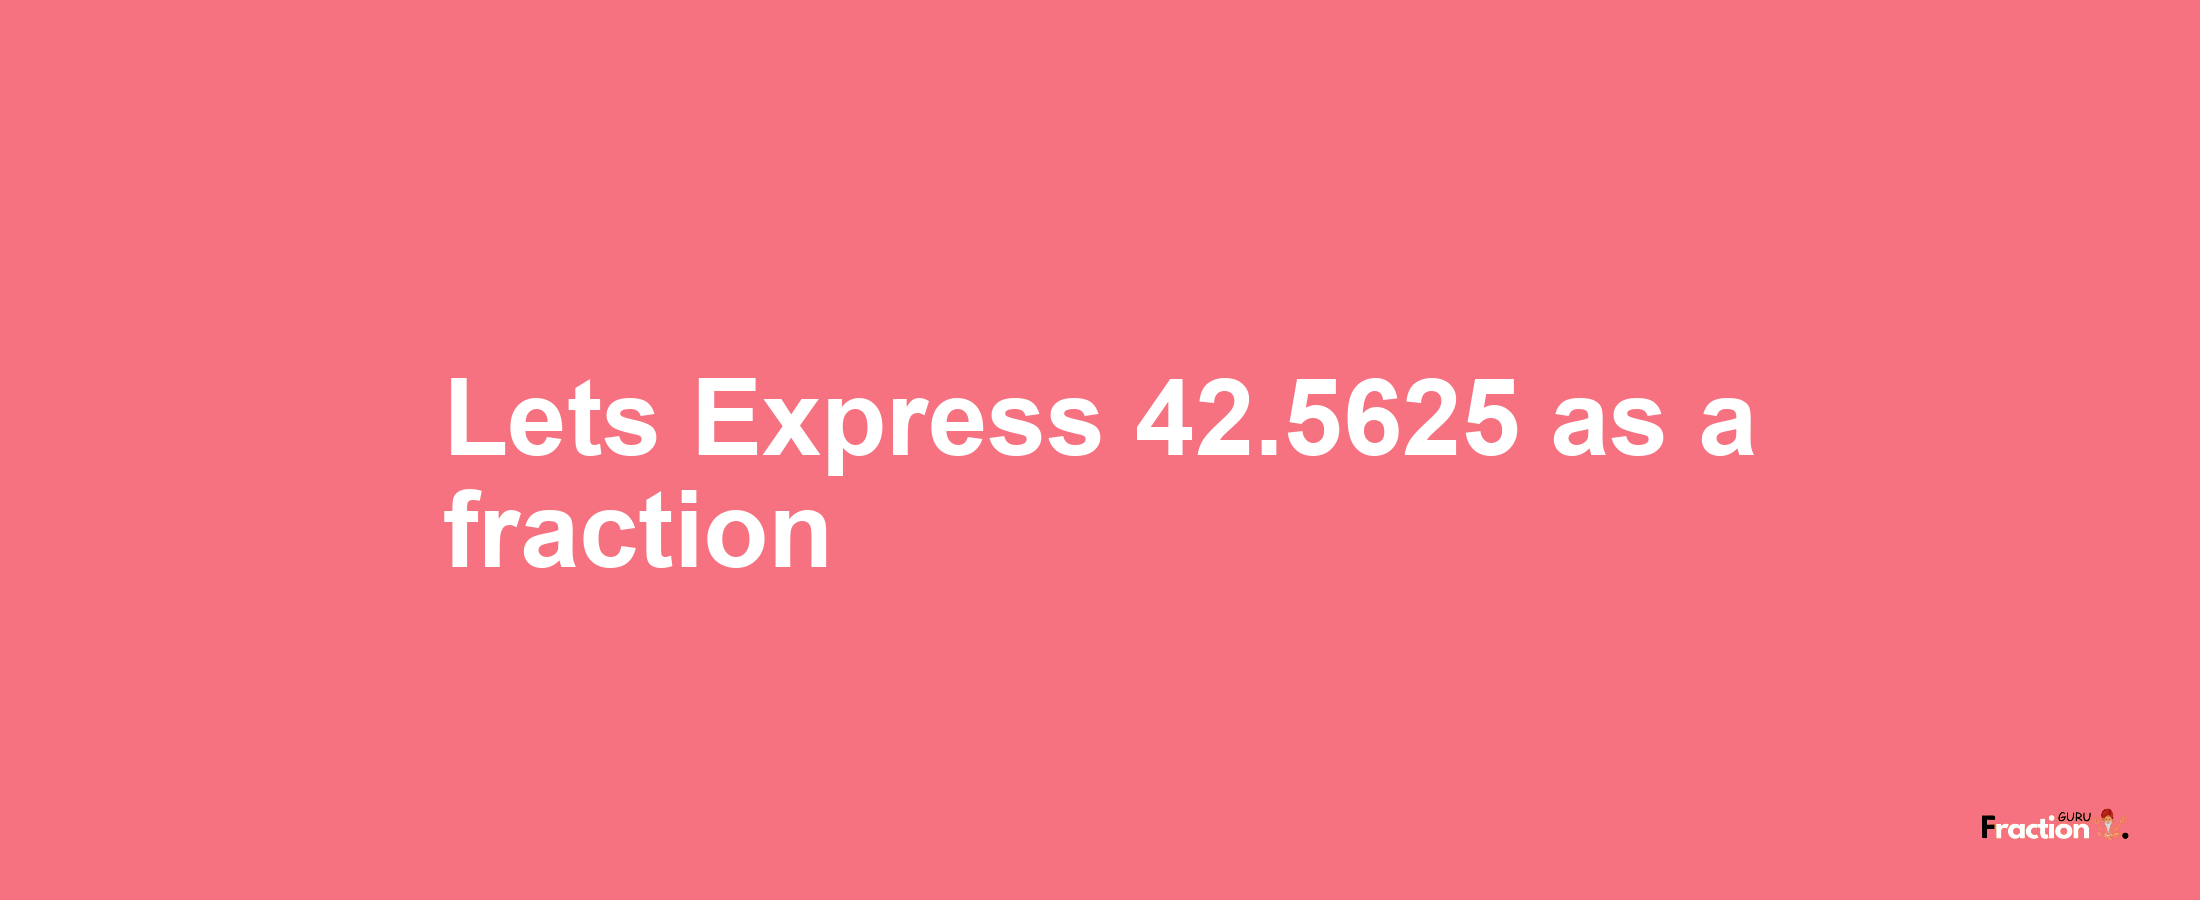 Lets Express 42.5625 as afraction